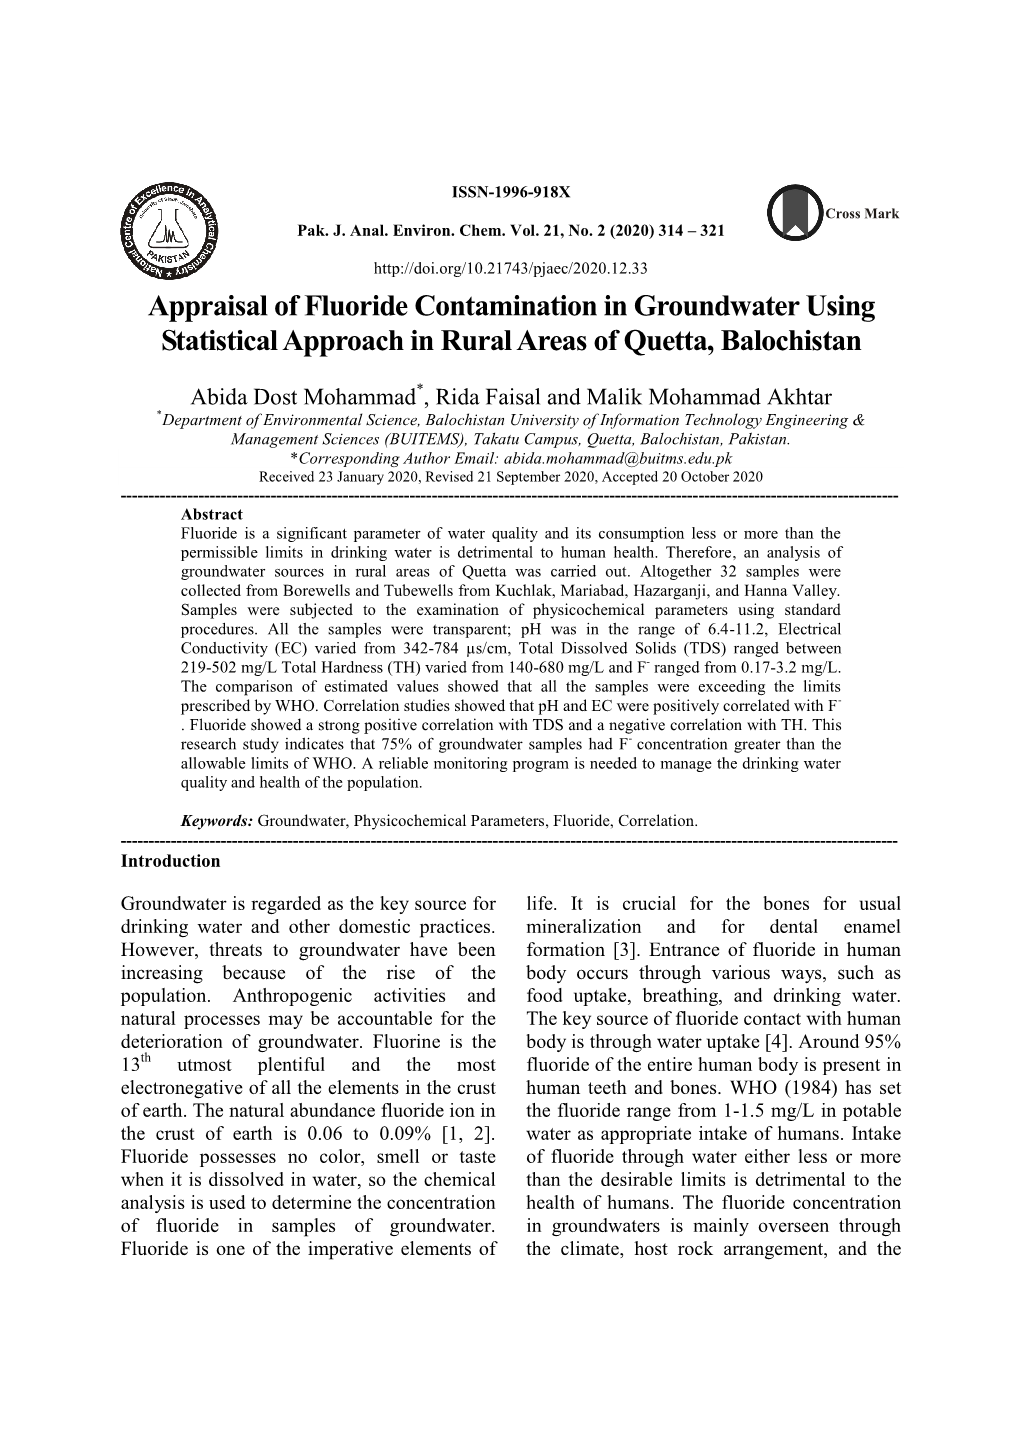 Appraisal of Fluoride Contamination in Groundwater Using Statistical Approach in Rural Areas of Quetta, Balochistan